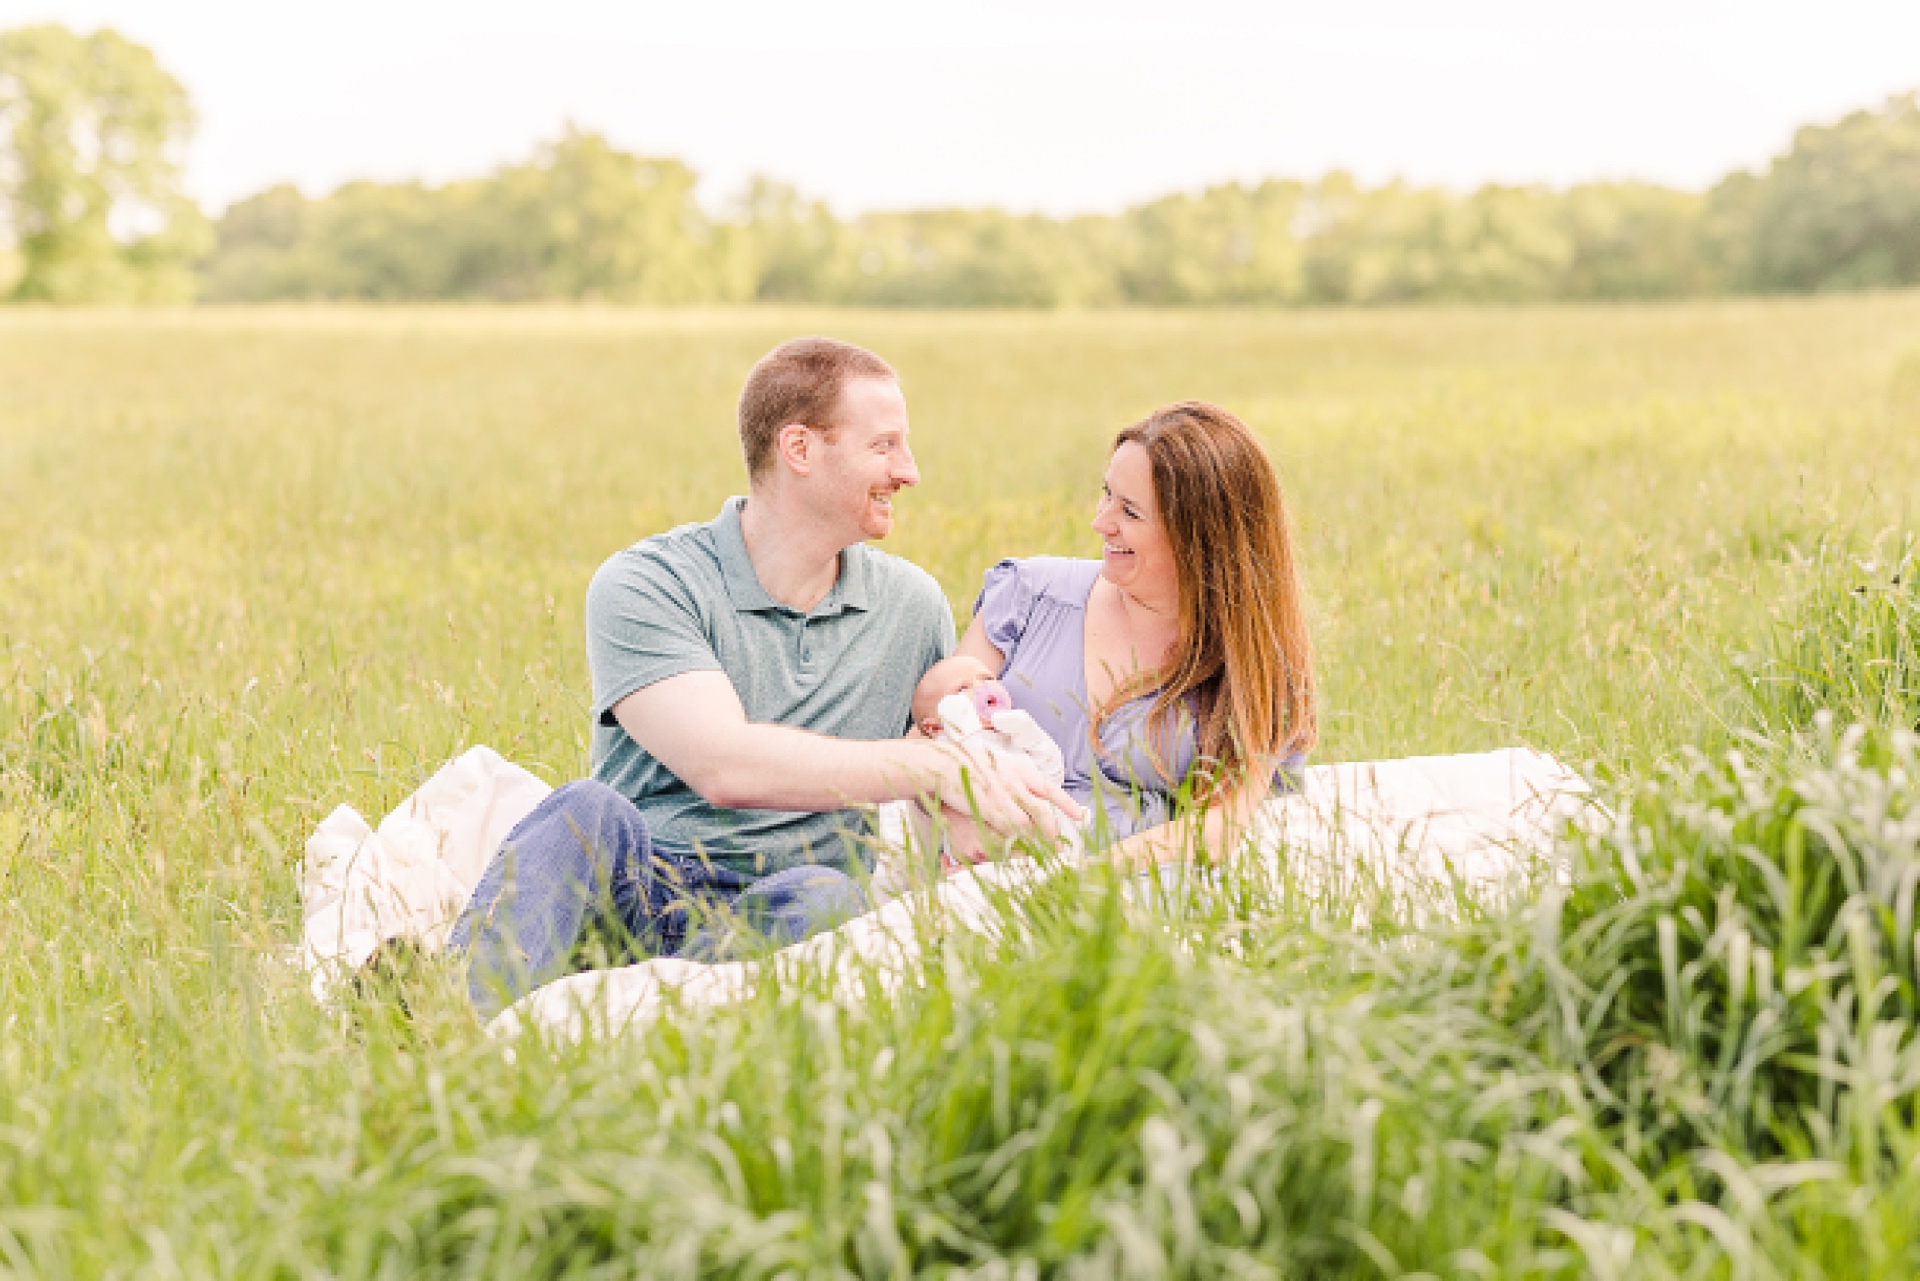 Parents cuddle with newborn on a blanket in a field of grass during outdoor newborn photo session with Sara Sniderman Photography at Heard Farm Wayland Massachusetts